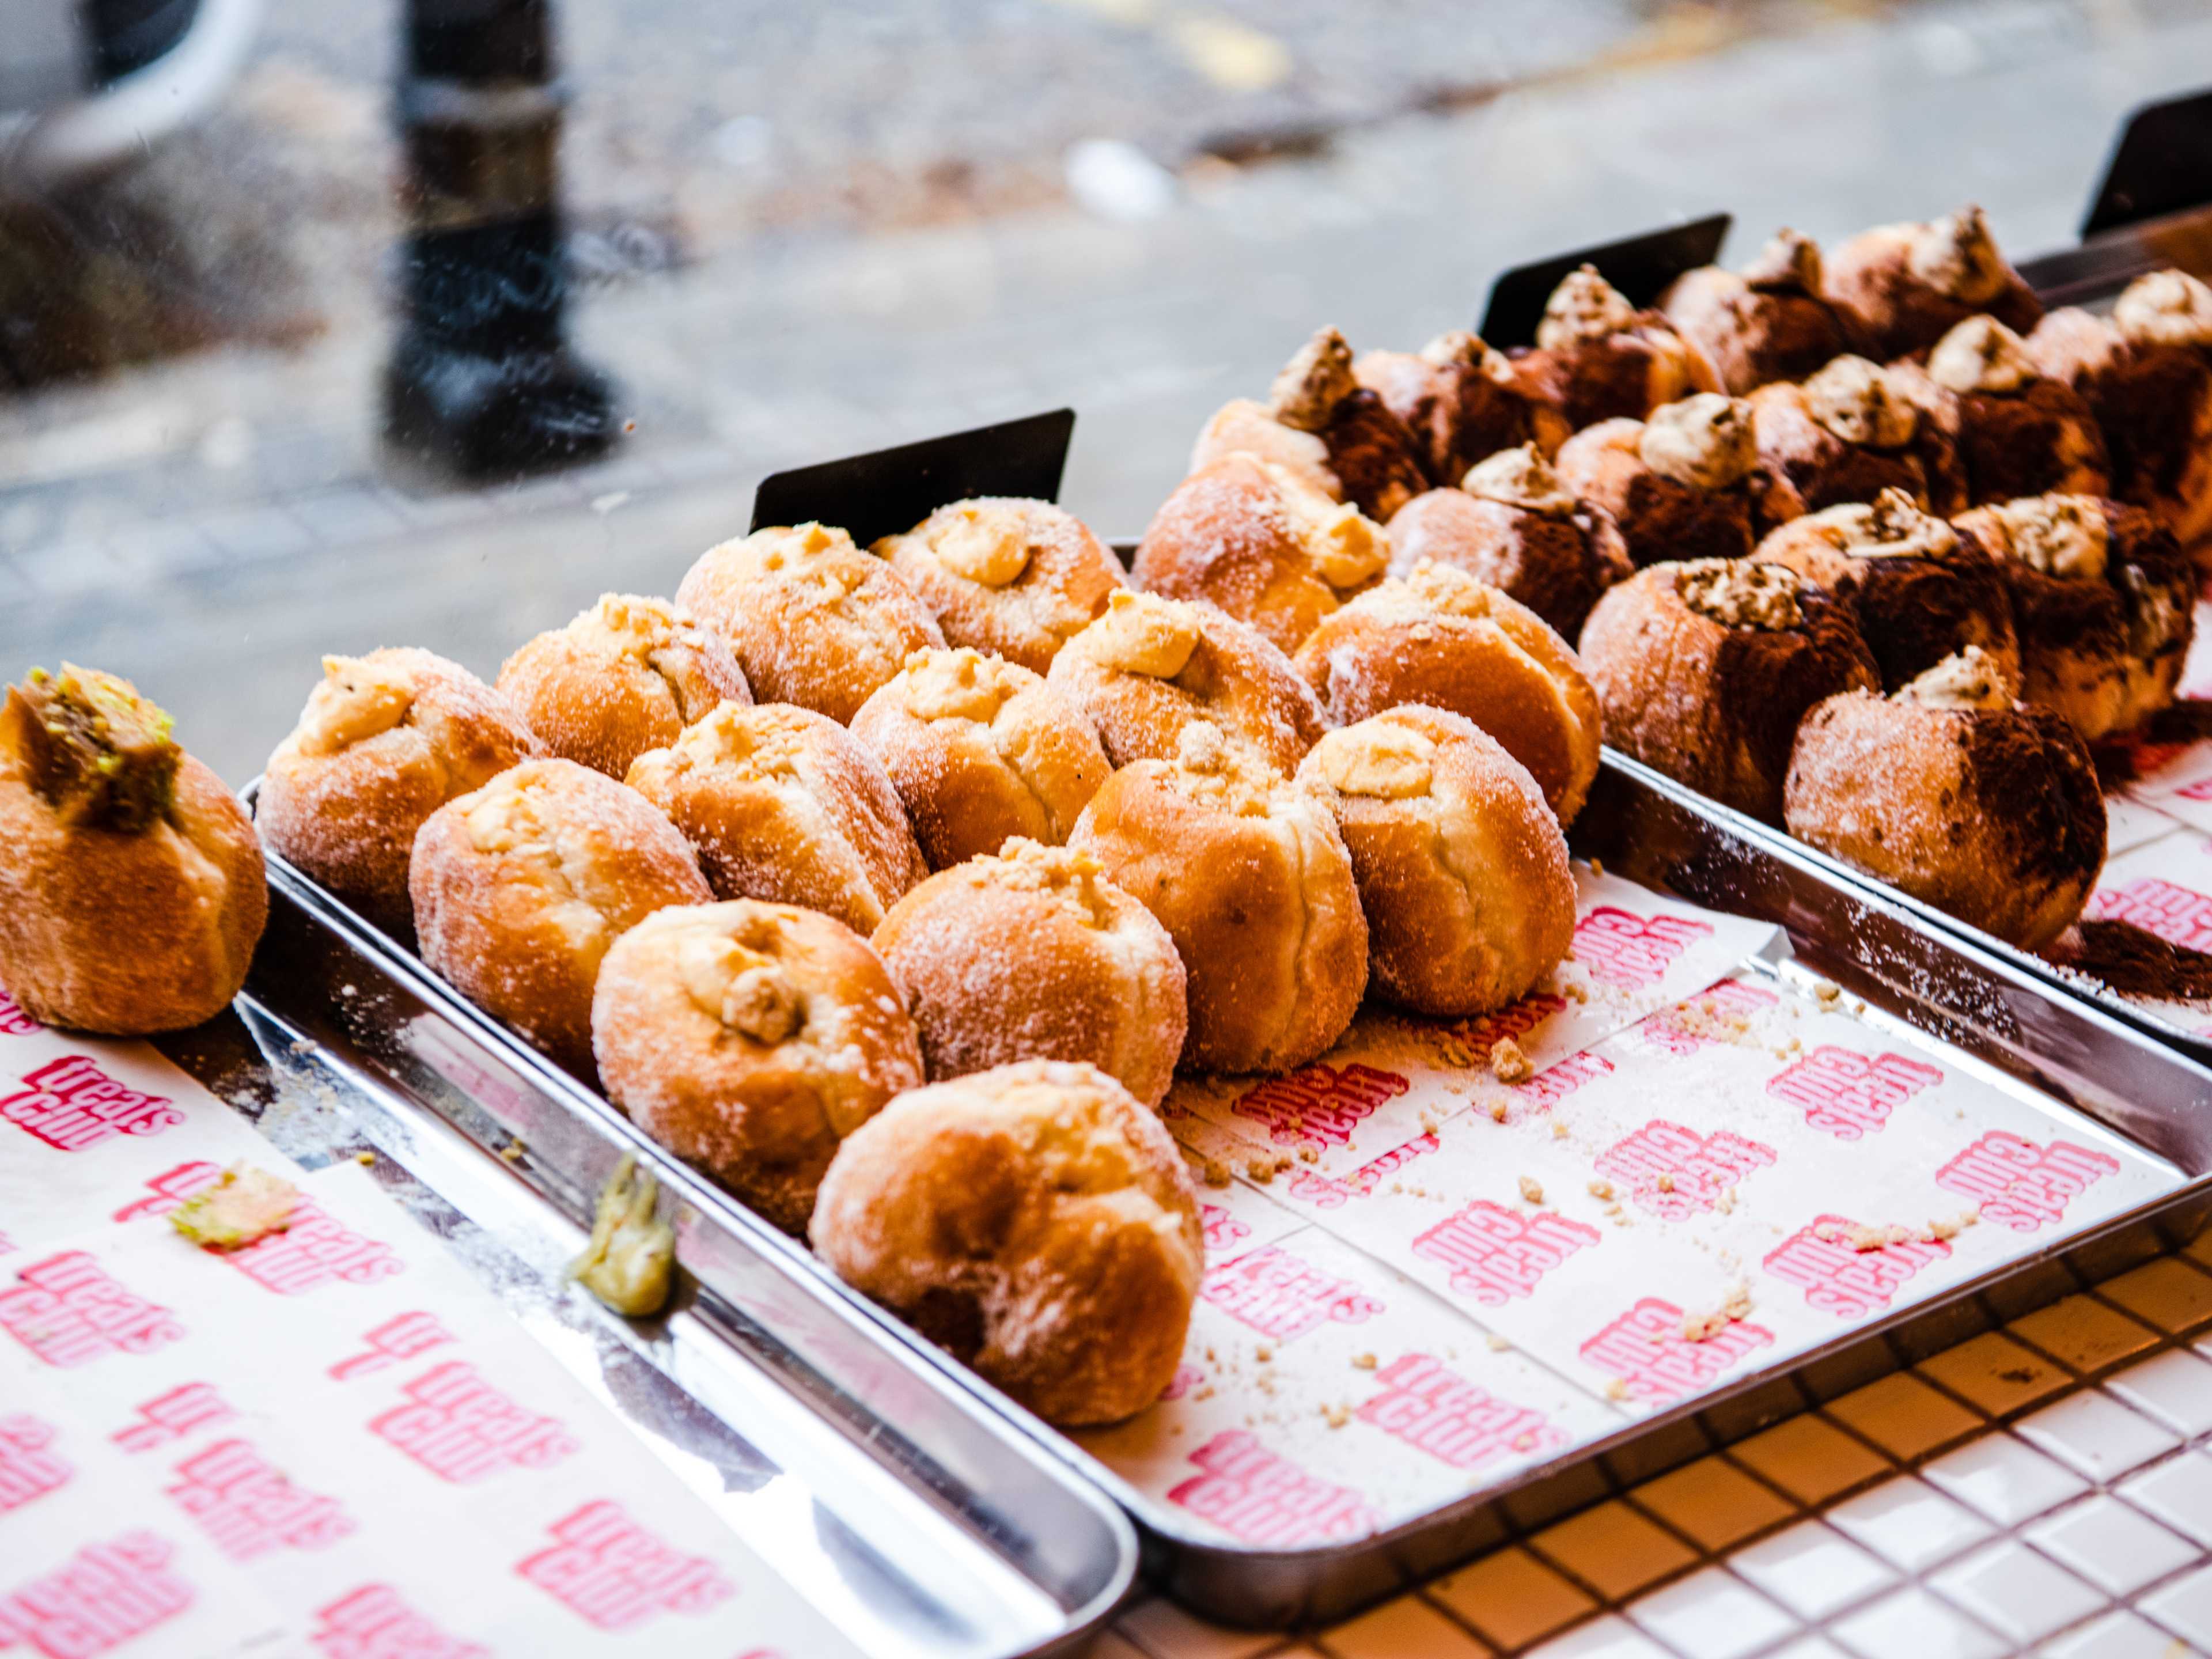 A spread of doughnuts in the window at The Treats Club.